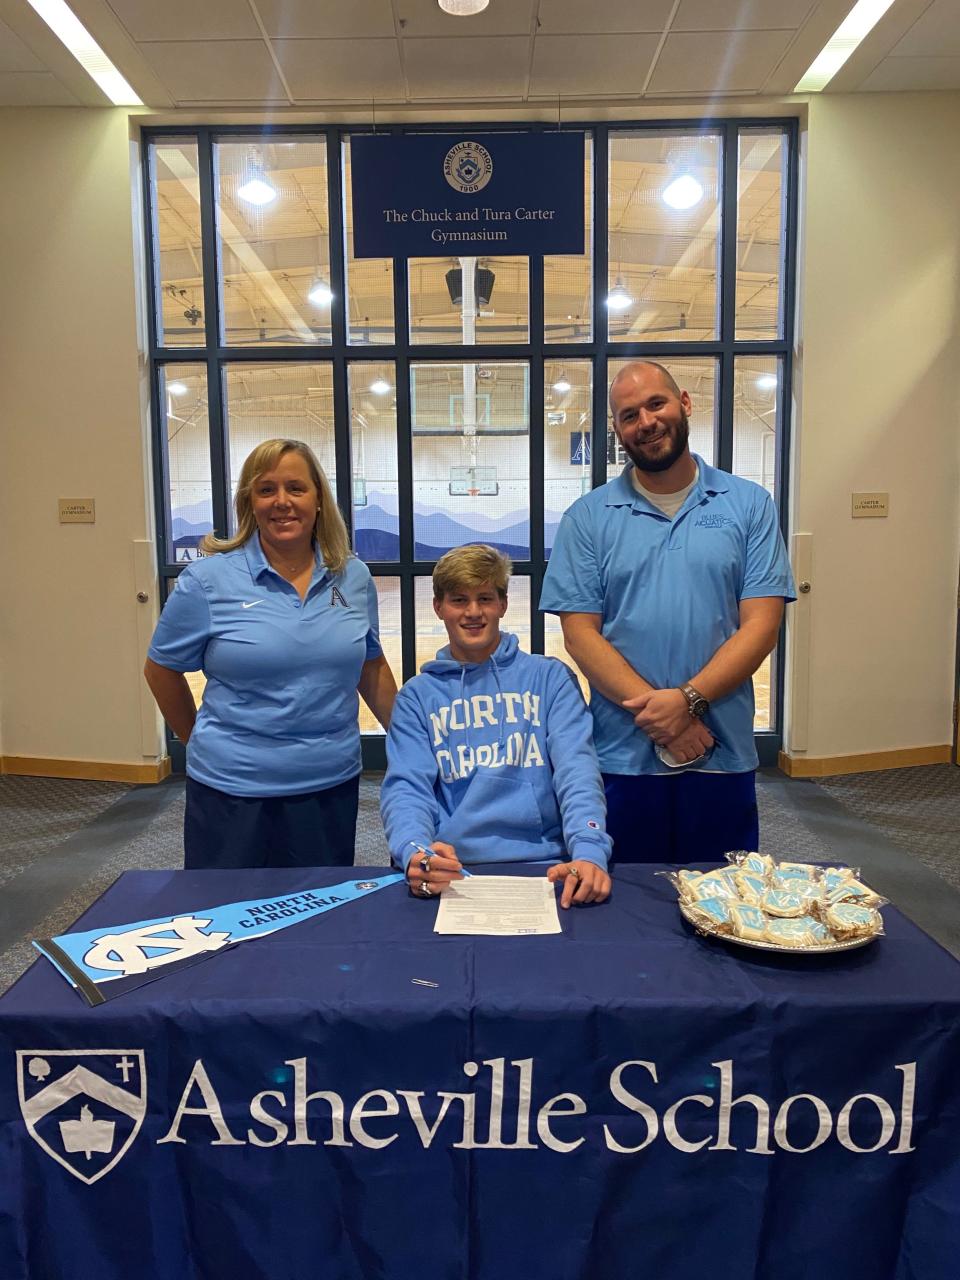 Asheville School swimmer Patrick Sleater signs with UNC on Nov. 10, 2021.